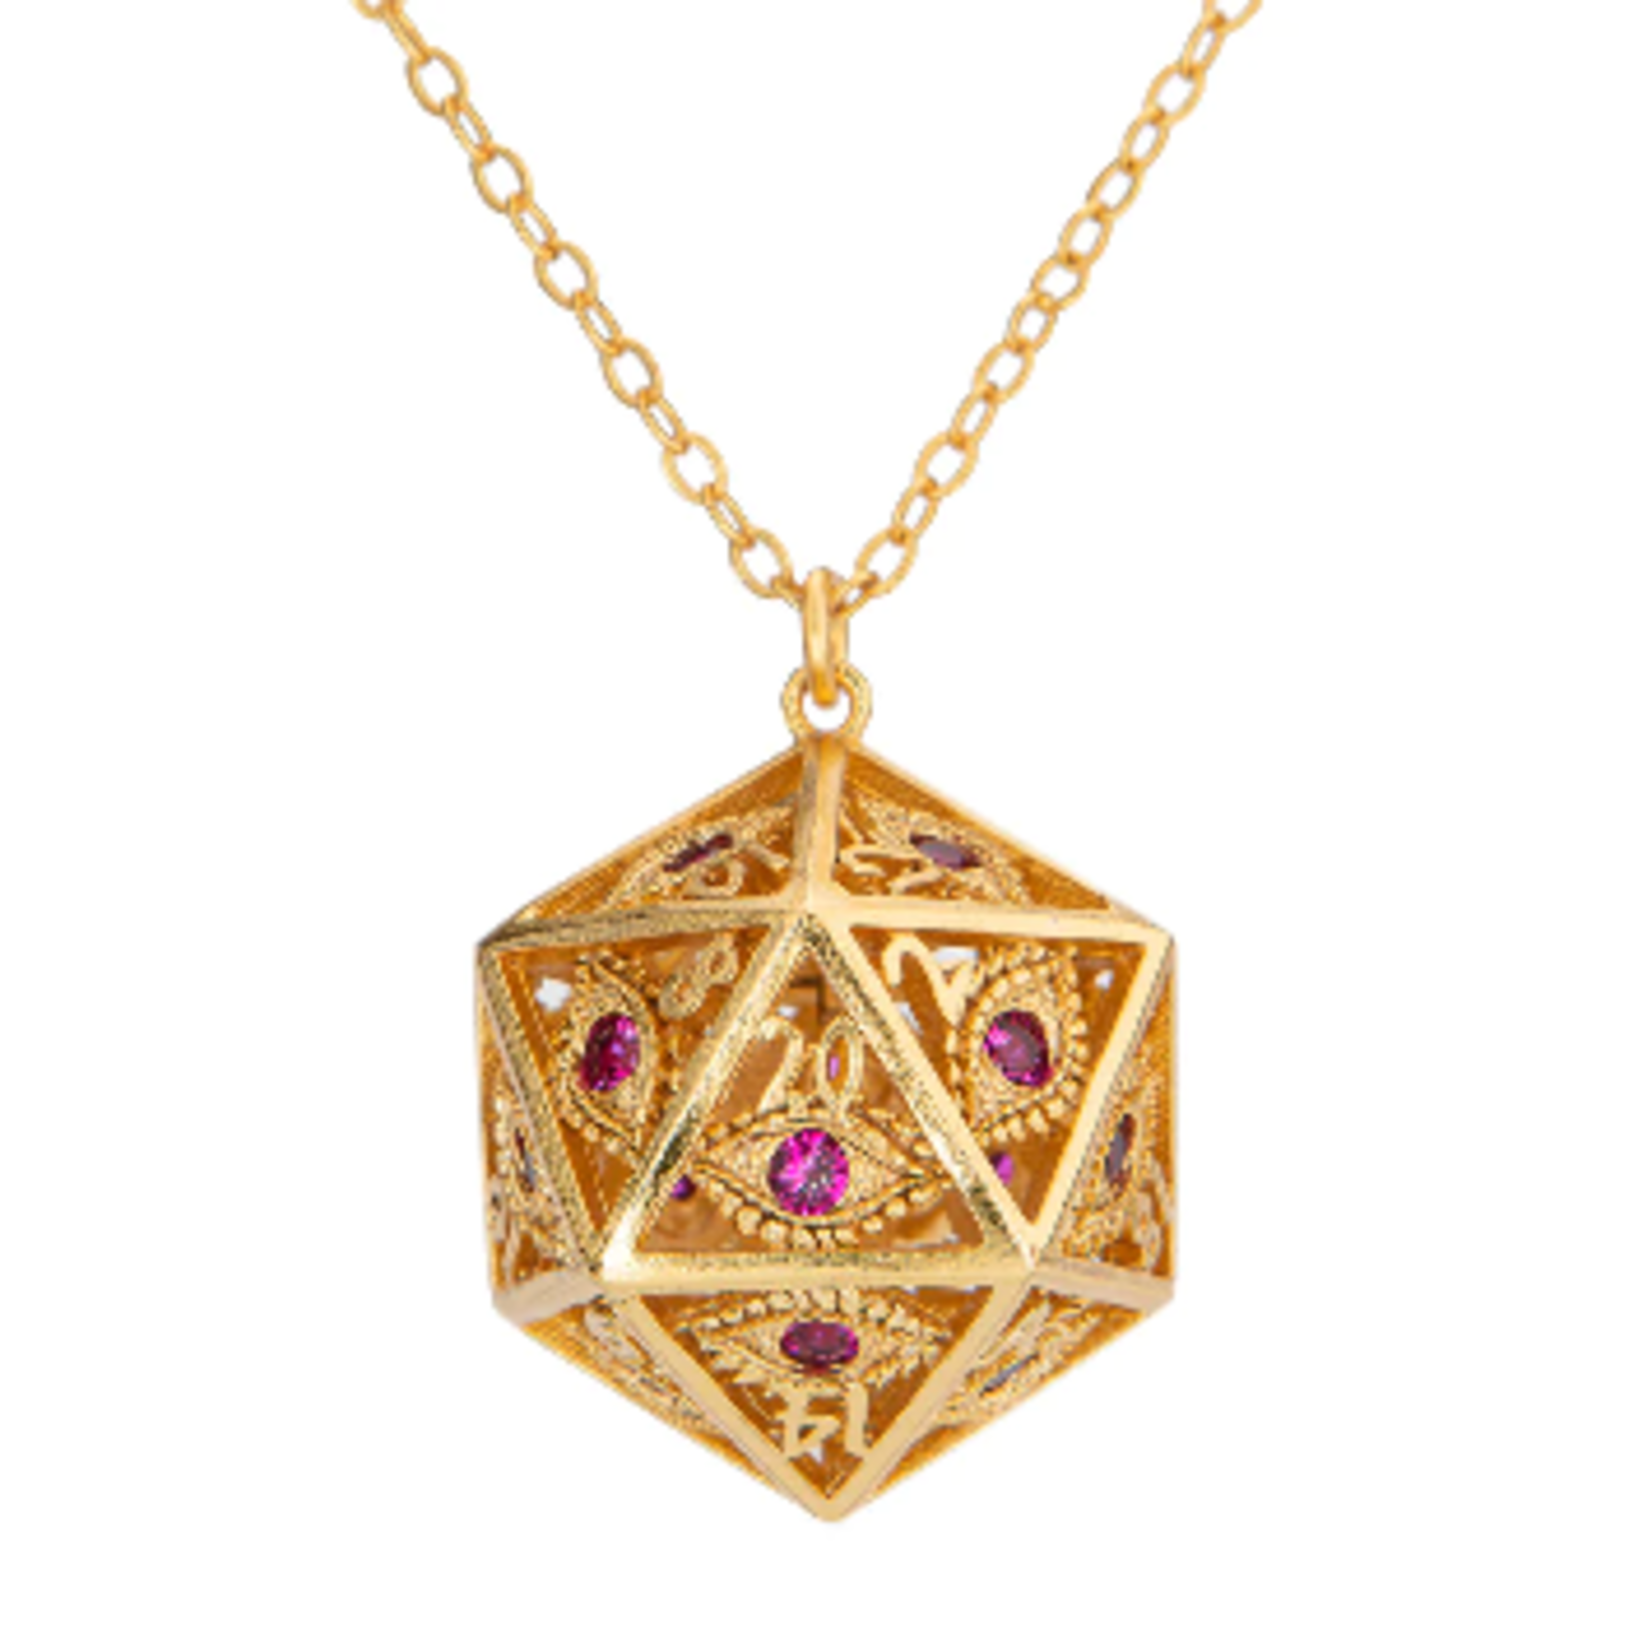 Dragon's Eye D20 Necklace - Gold with Ruby Red Gems